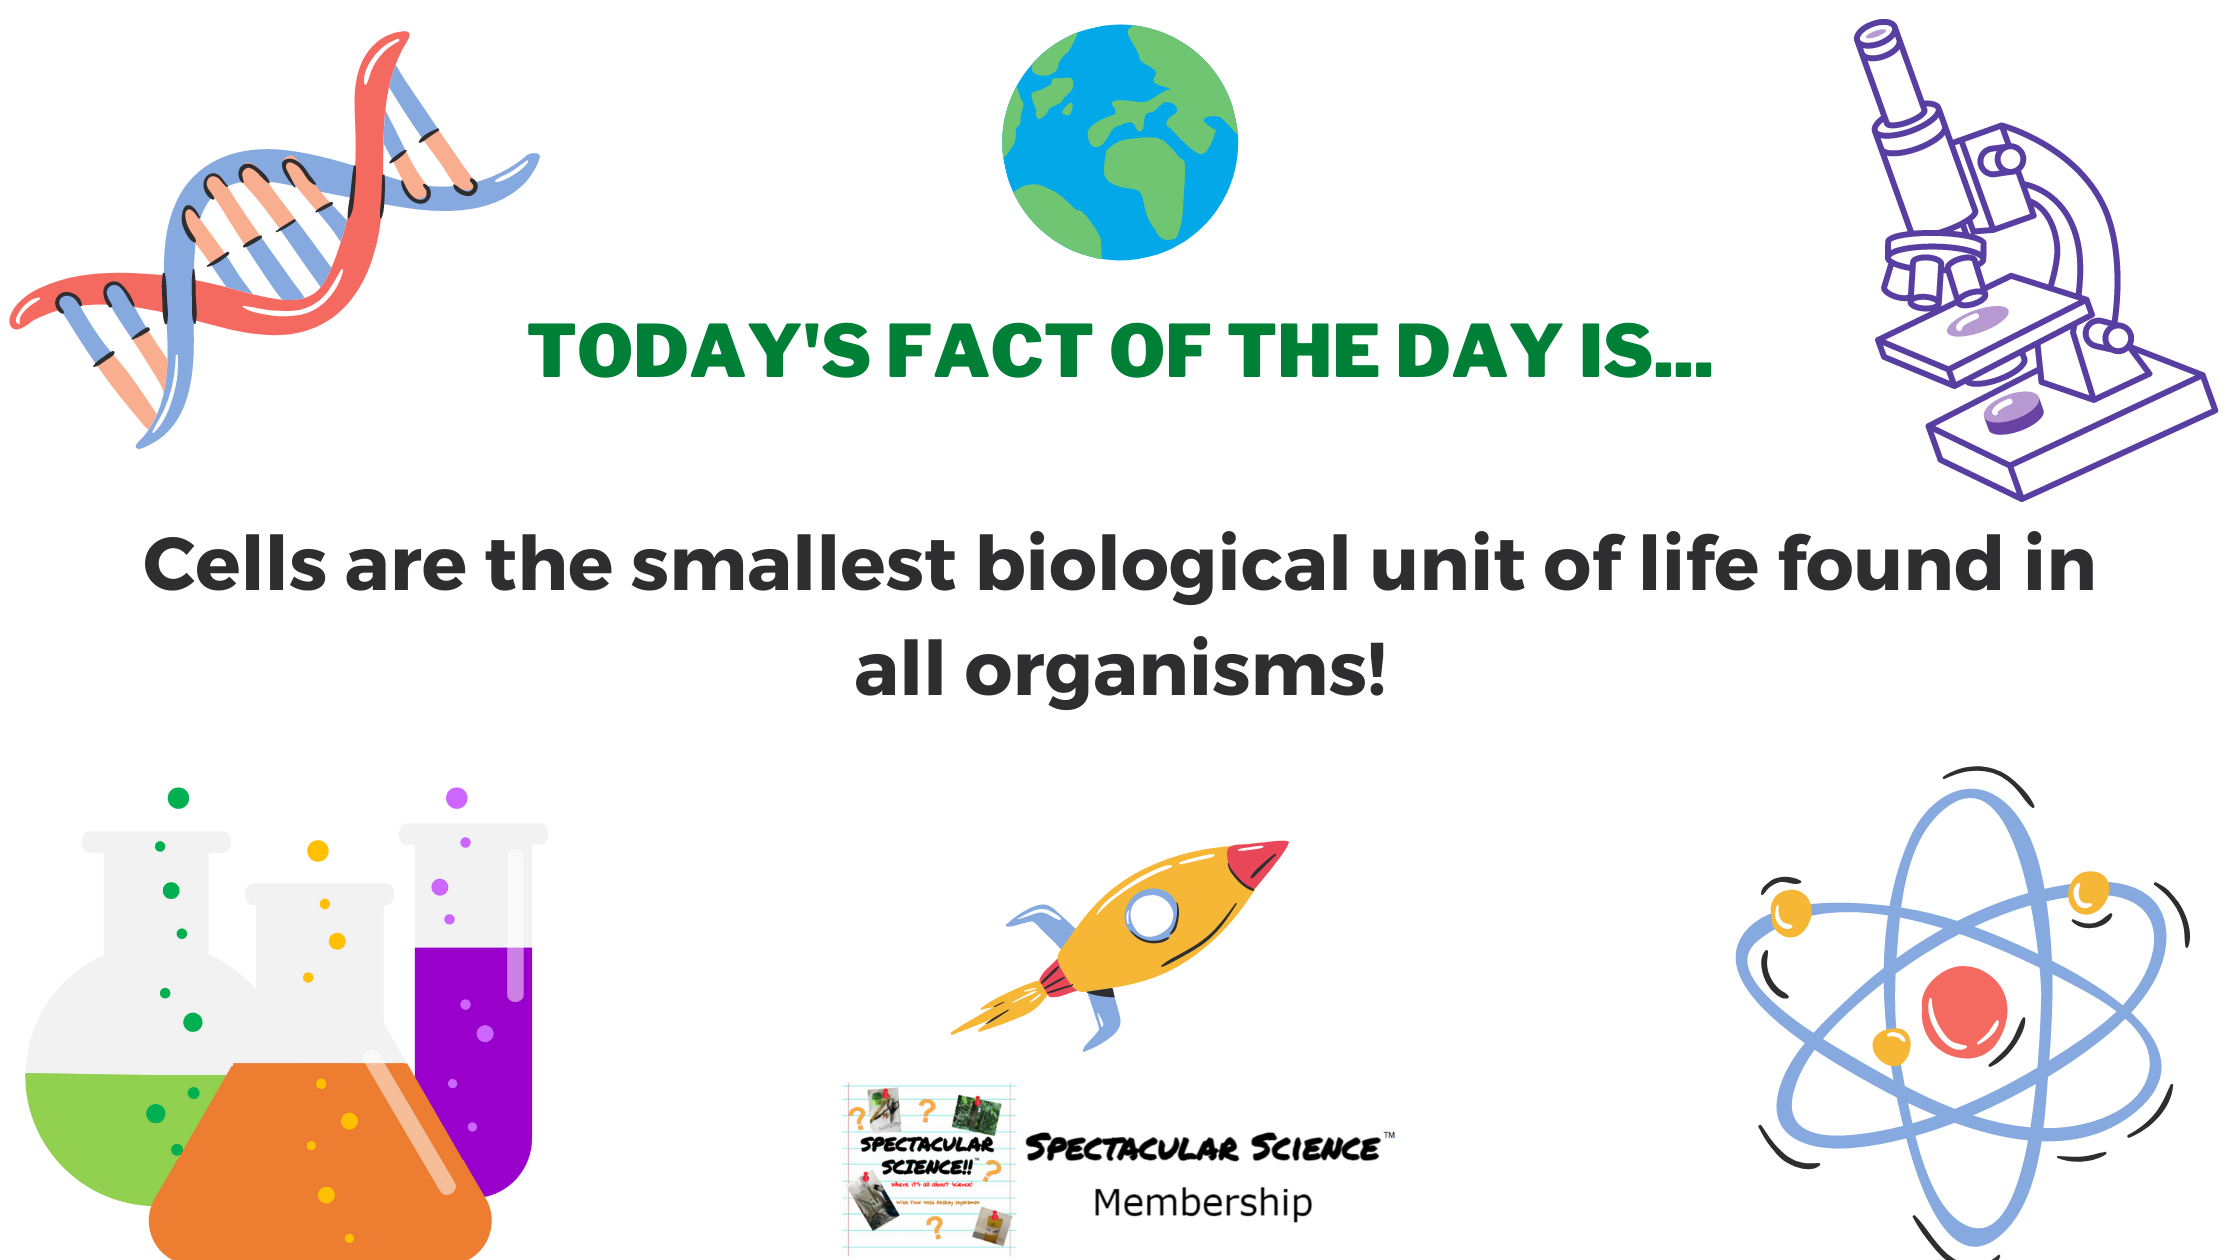 Fact of the Day Image Apr. 11th